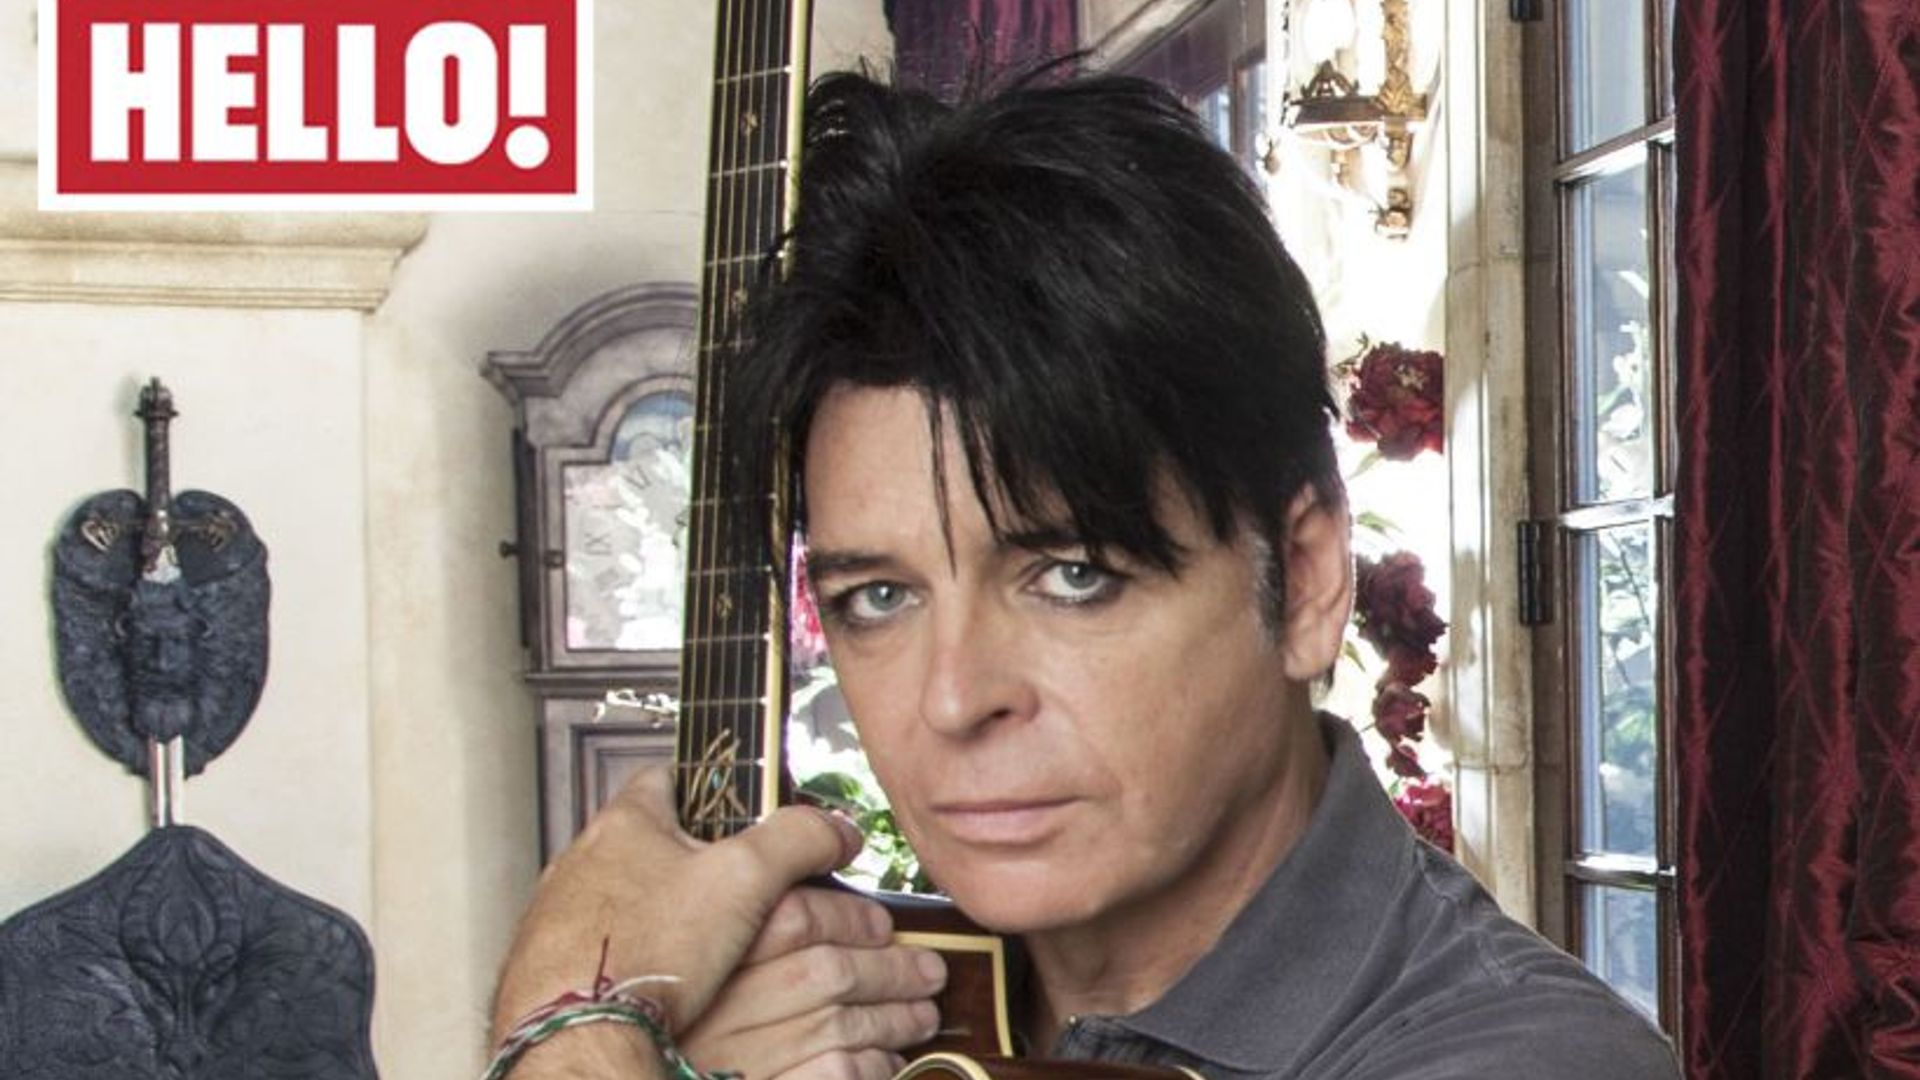 Step inside Gary Numan's extraordinary home next week only in HELLO!